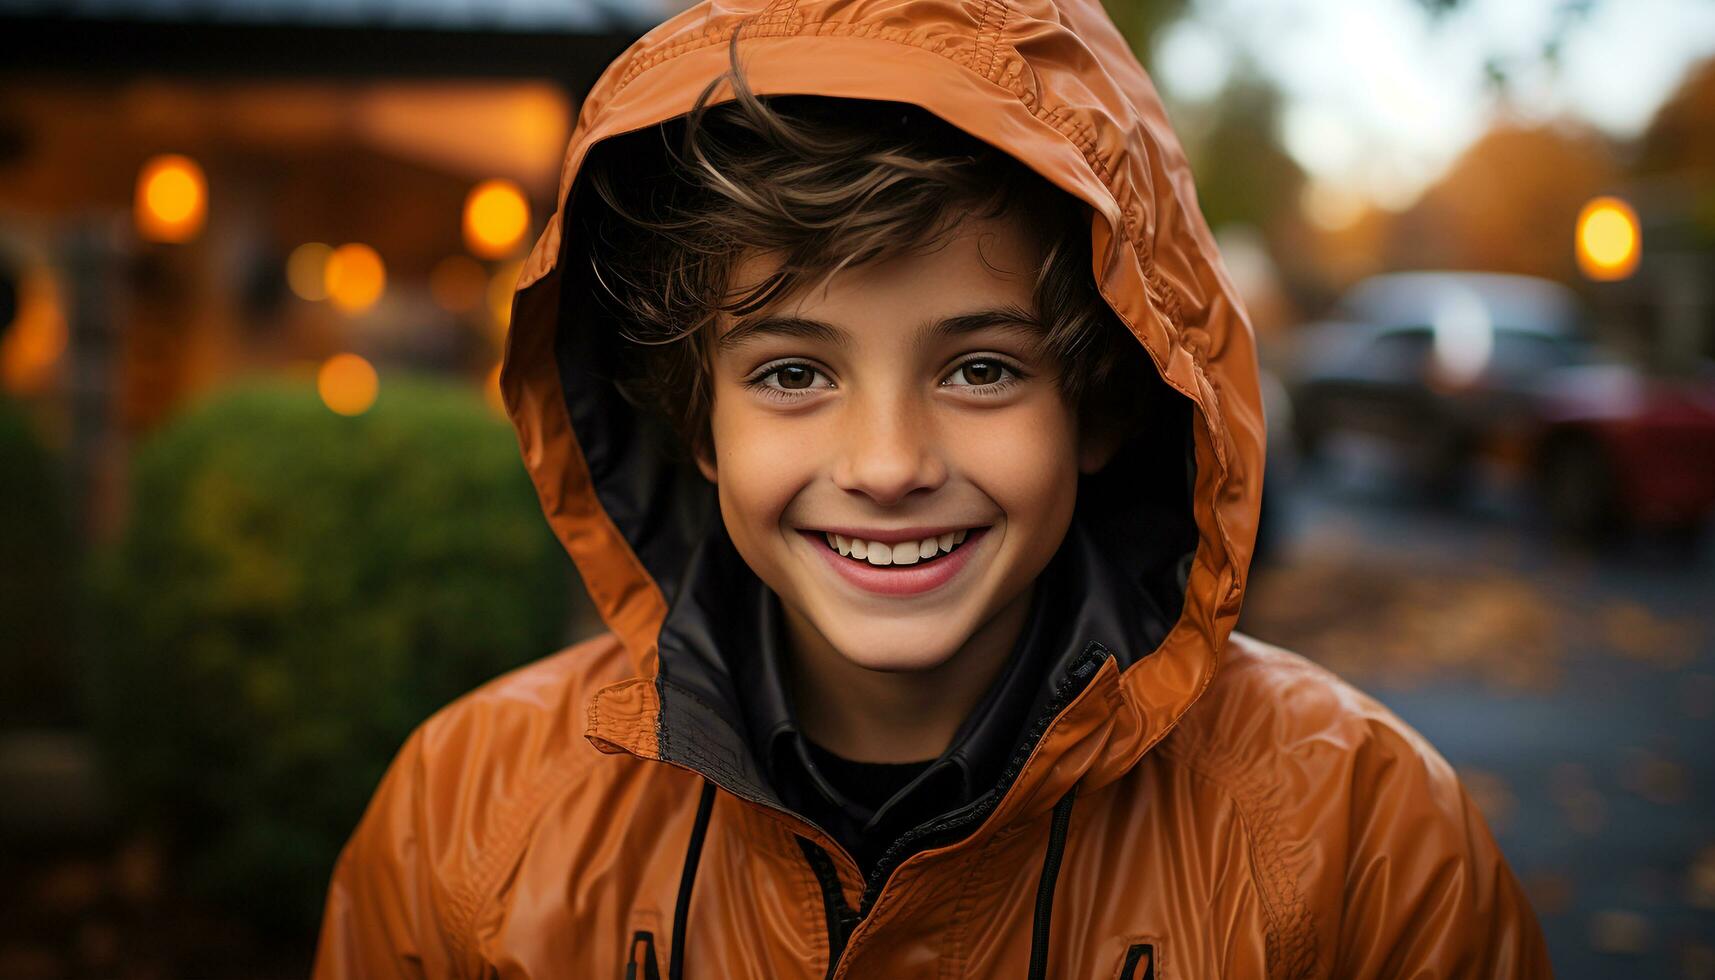 Smiling child outdoors, happiness in wet autumn nature portrait generated by AI photo